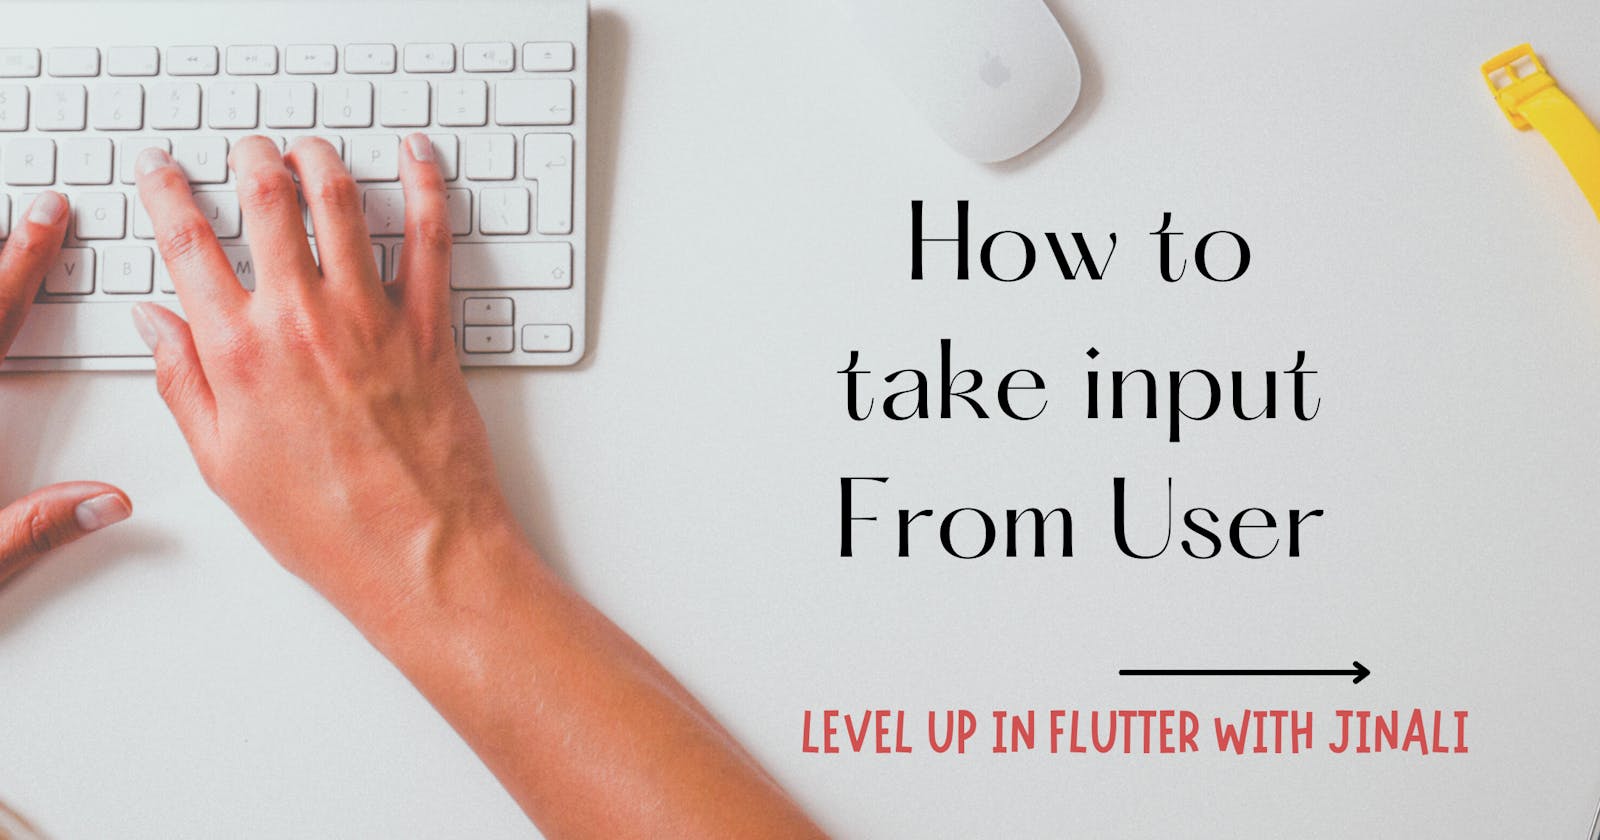 How to take input from user: